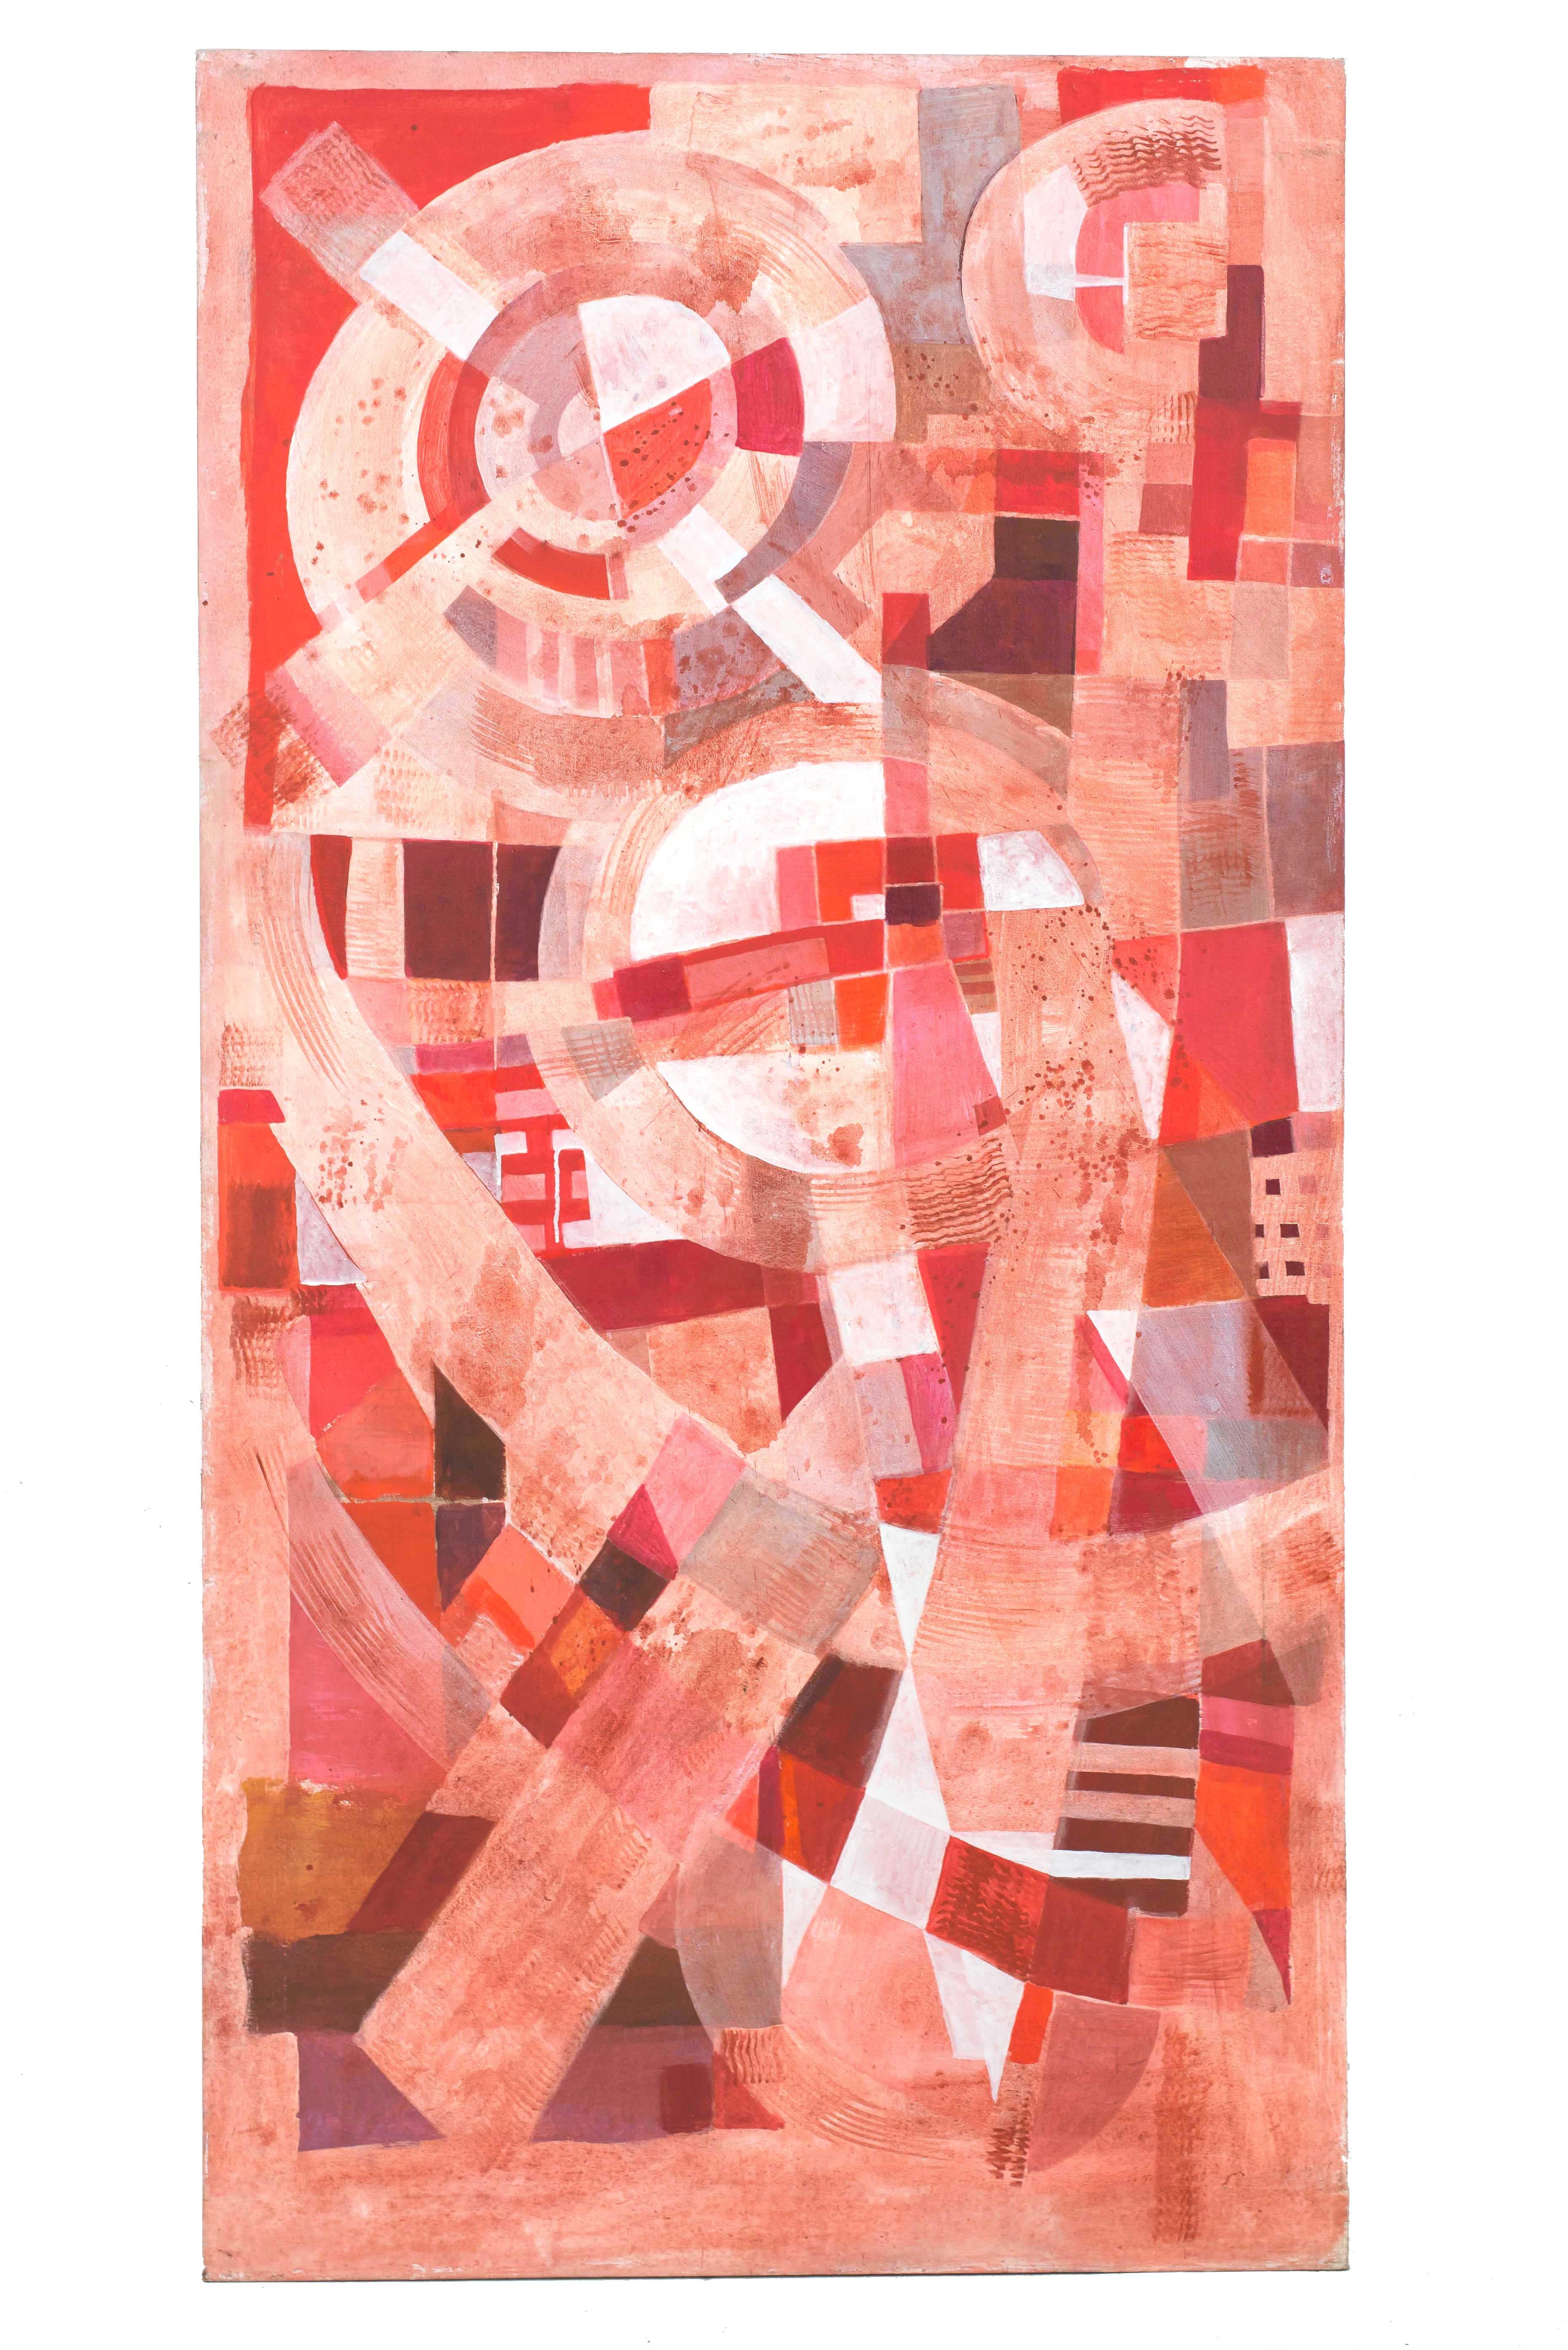 Set of 3 contemporary abstract paintings (triptych) with gouache on rectangular canvas in shades of pink, red and white. (TOM JOHN, 2010).
     